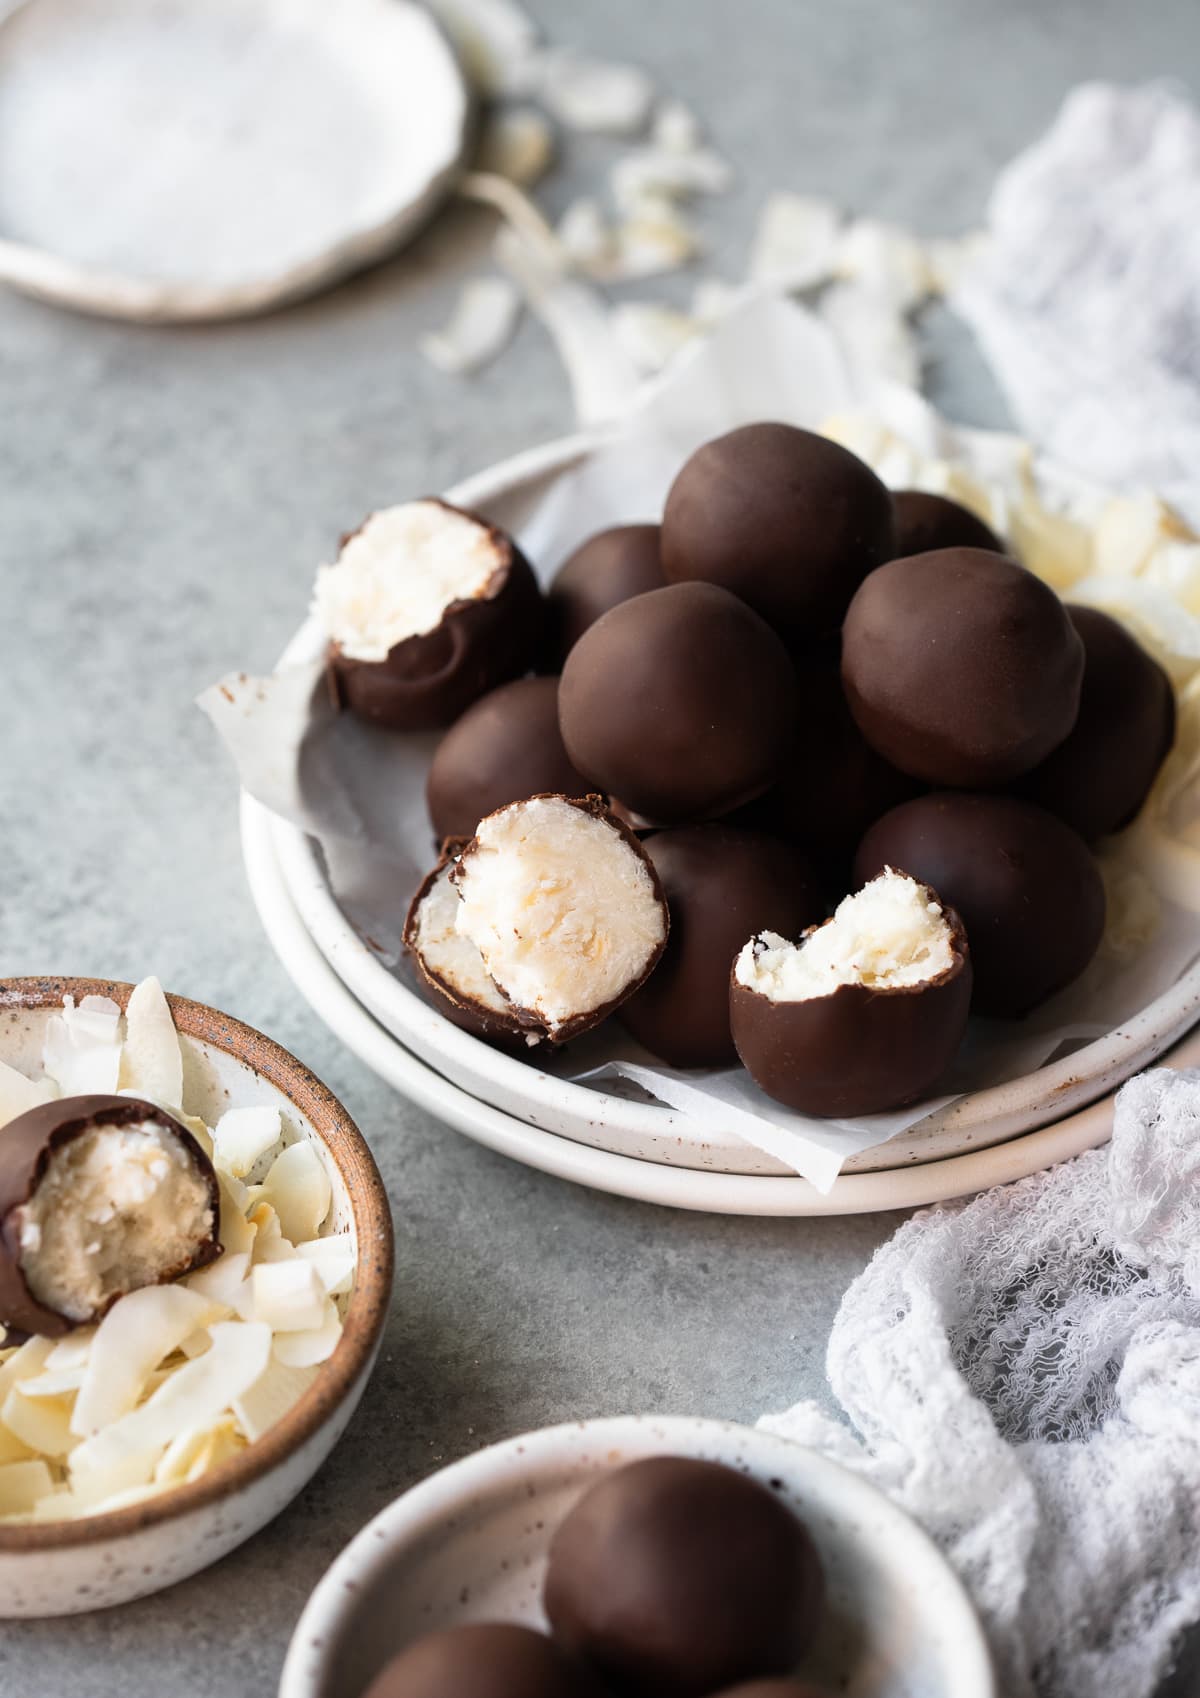 Easy-to-make coconut bites dipped in dark chocolate -- a perfect guilt-free sweet treat! {keto, gluten-free, vegan}